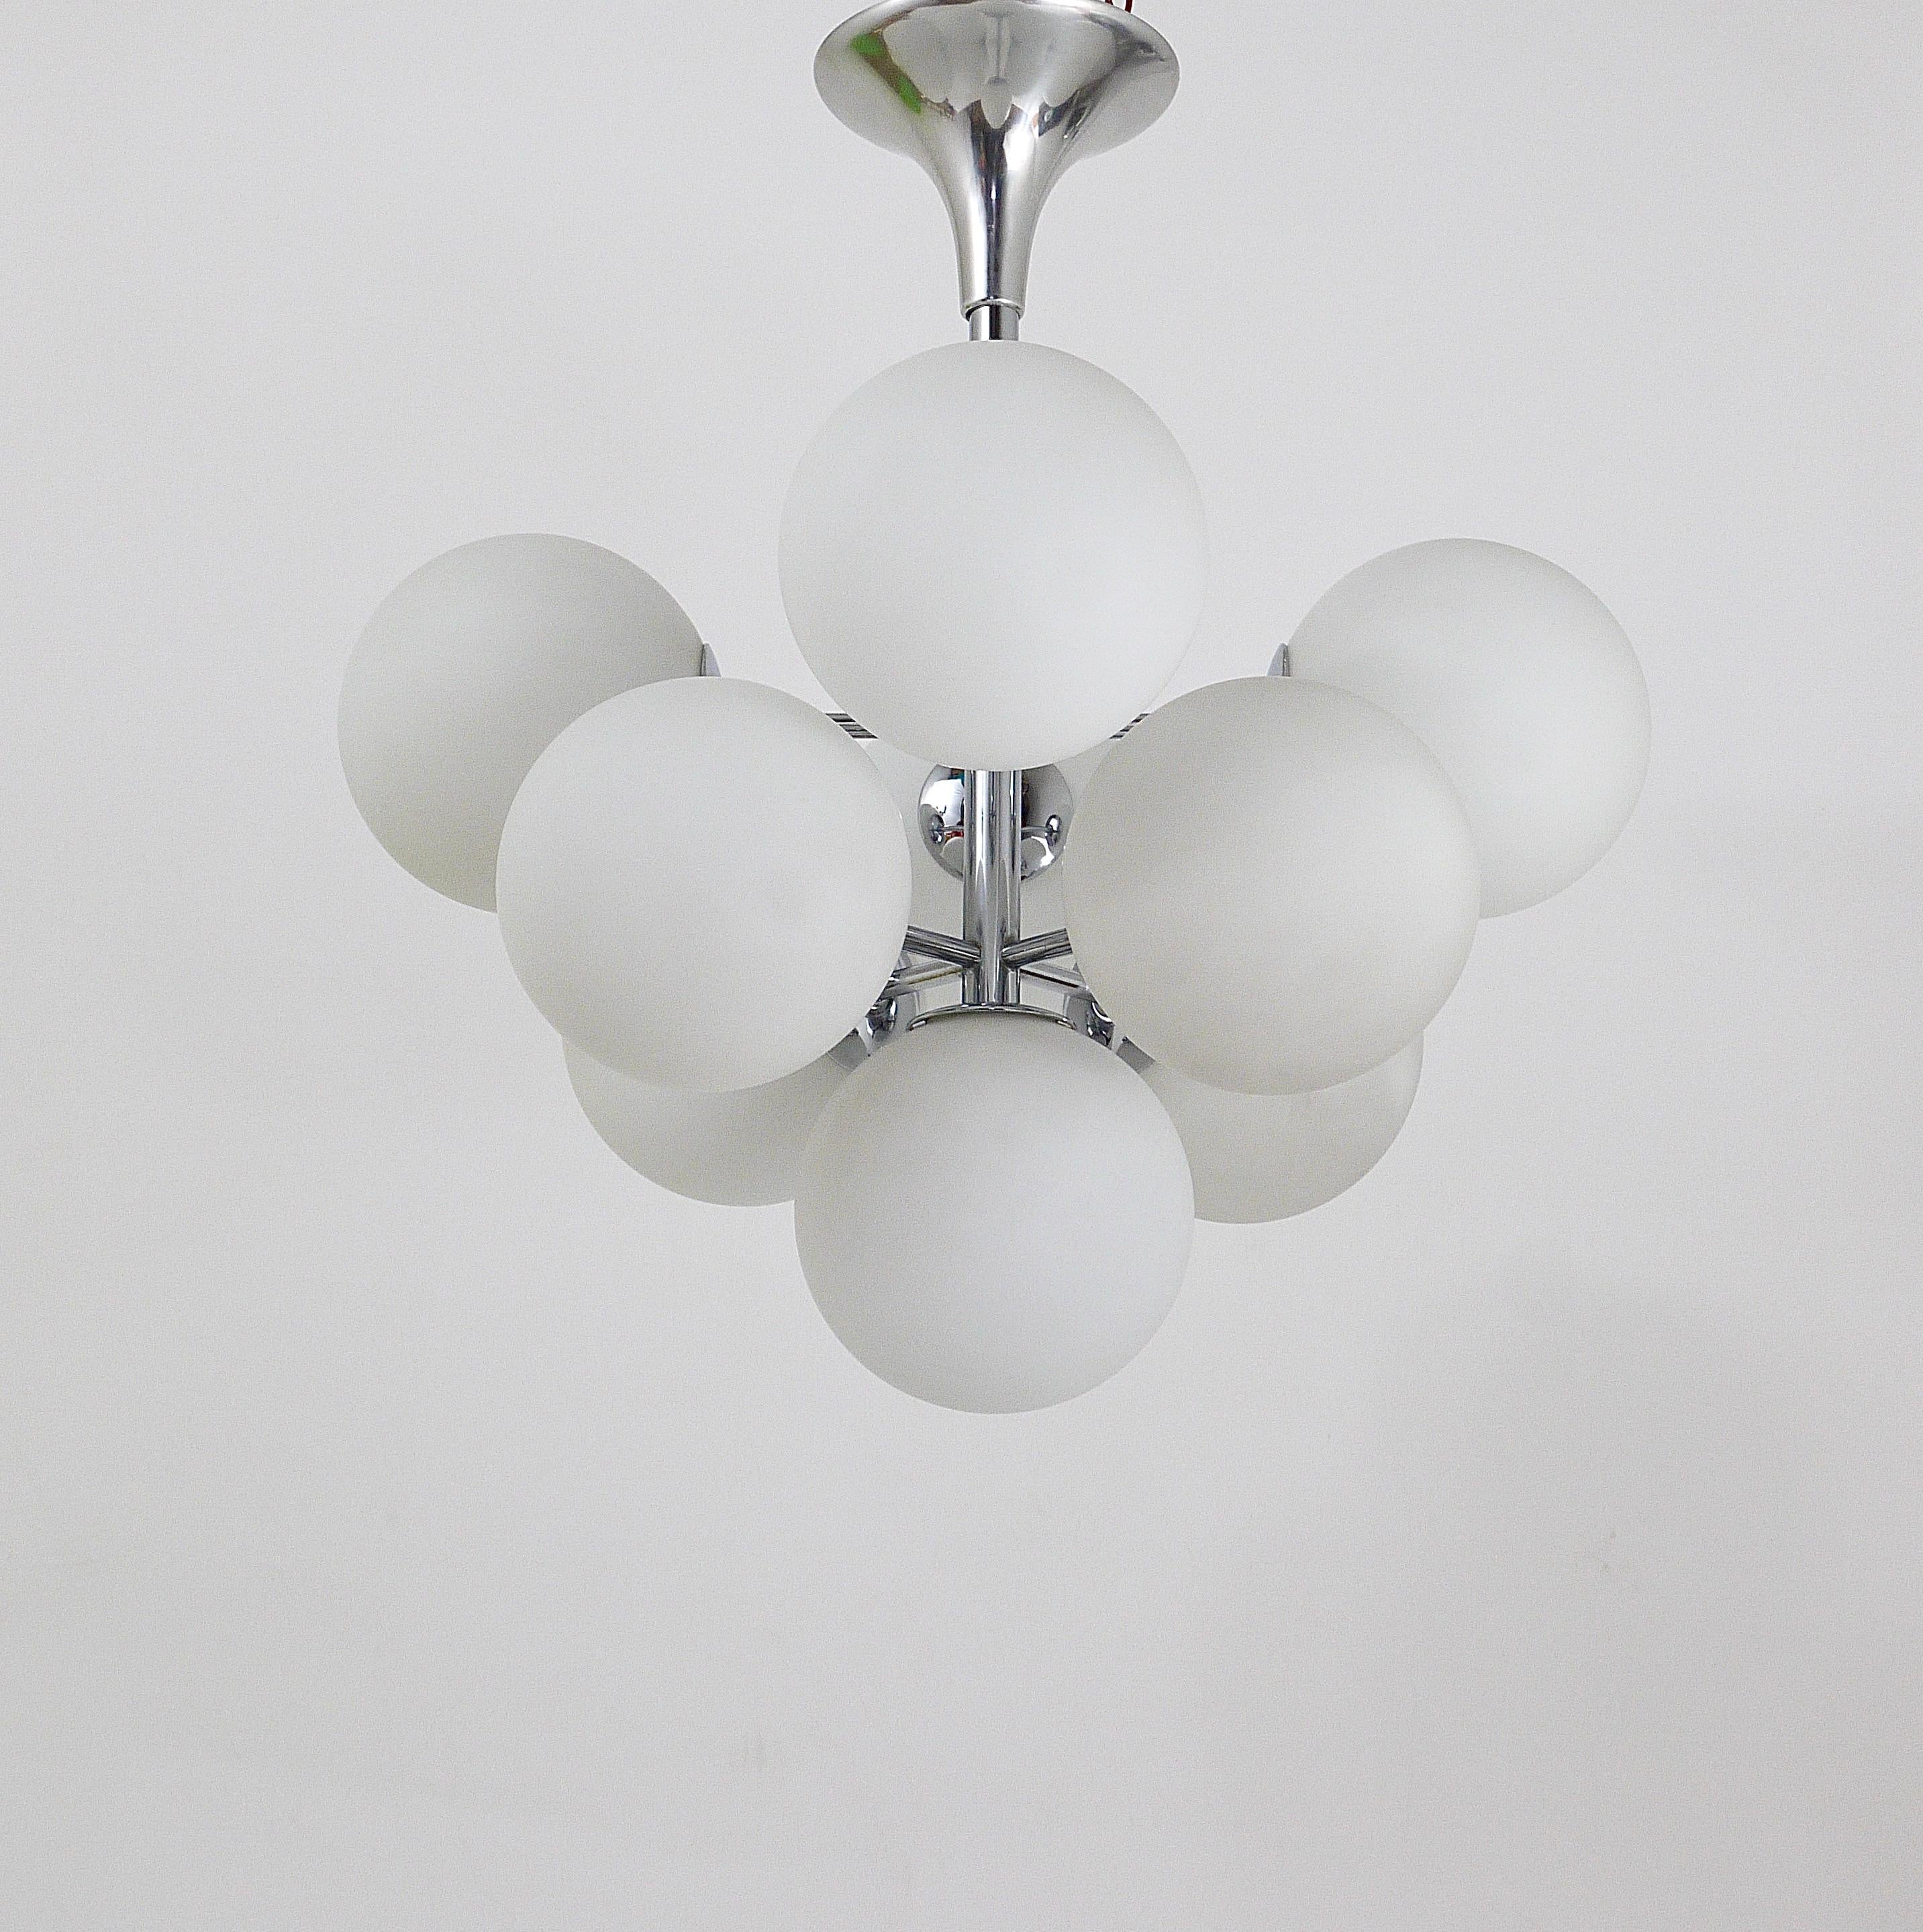 Swiss Chromed Atomic Chandelier with White Glass Globes, Temde, Switzerland For Sale